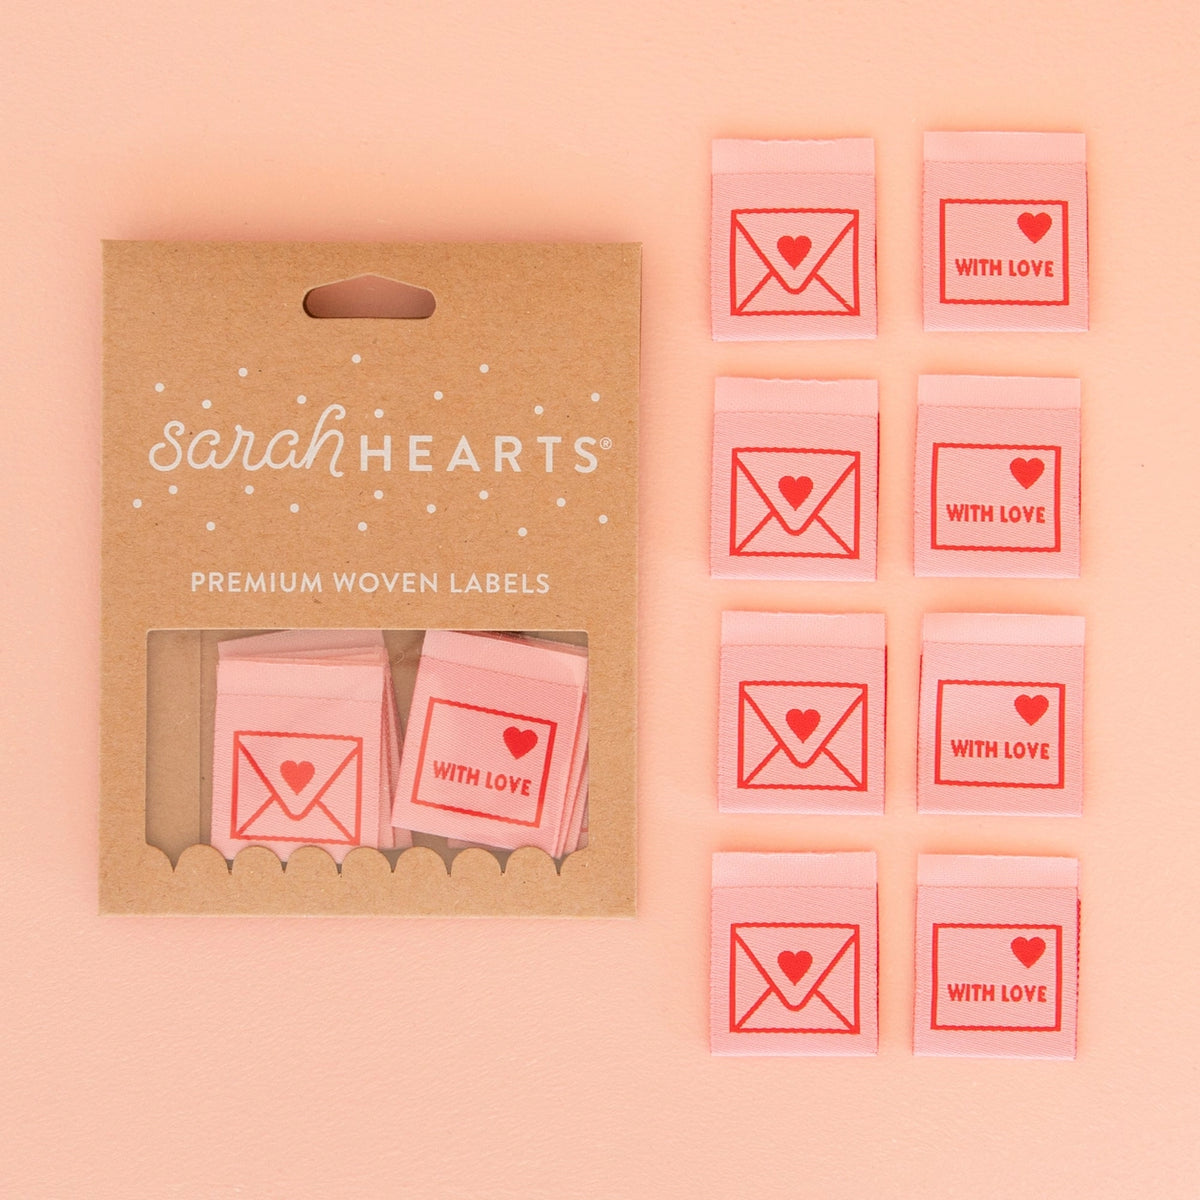 With Love Envelope Woven Labels by Sarah Hearts